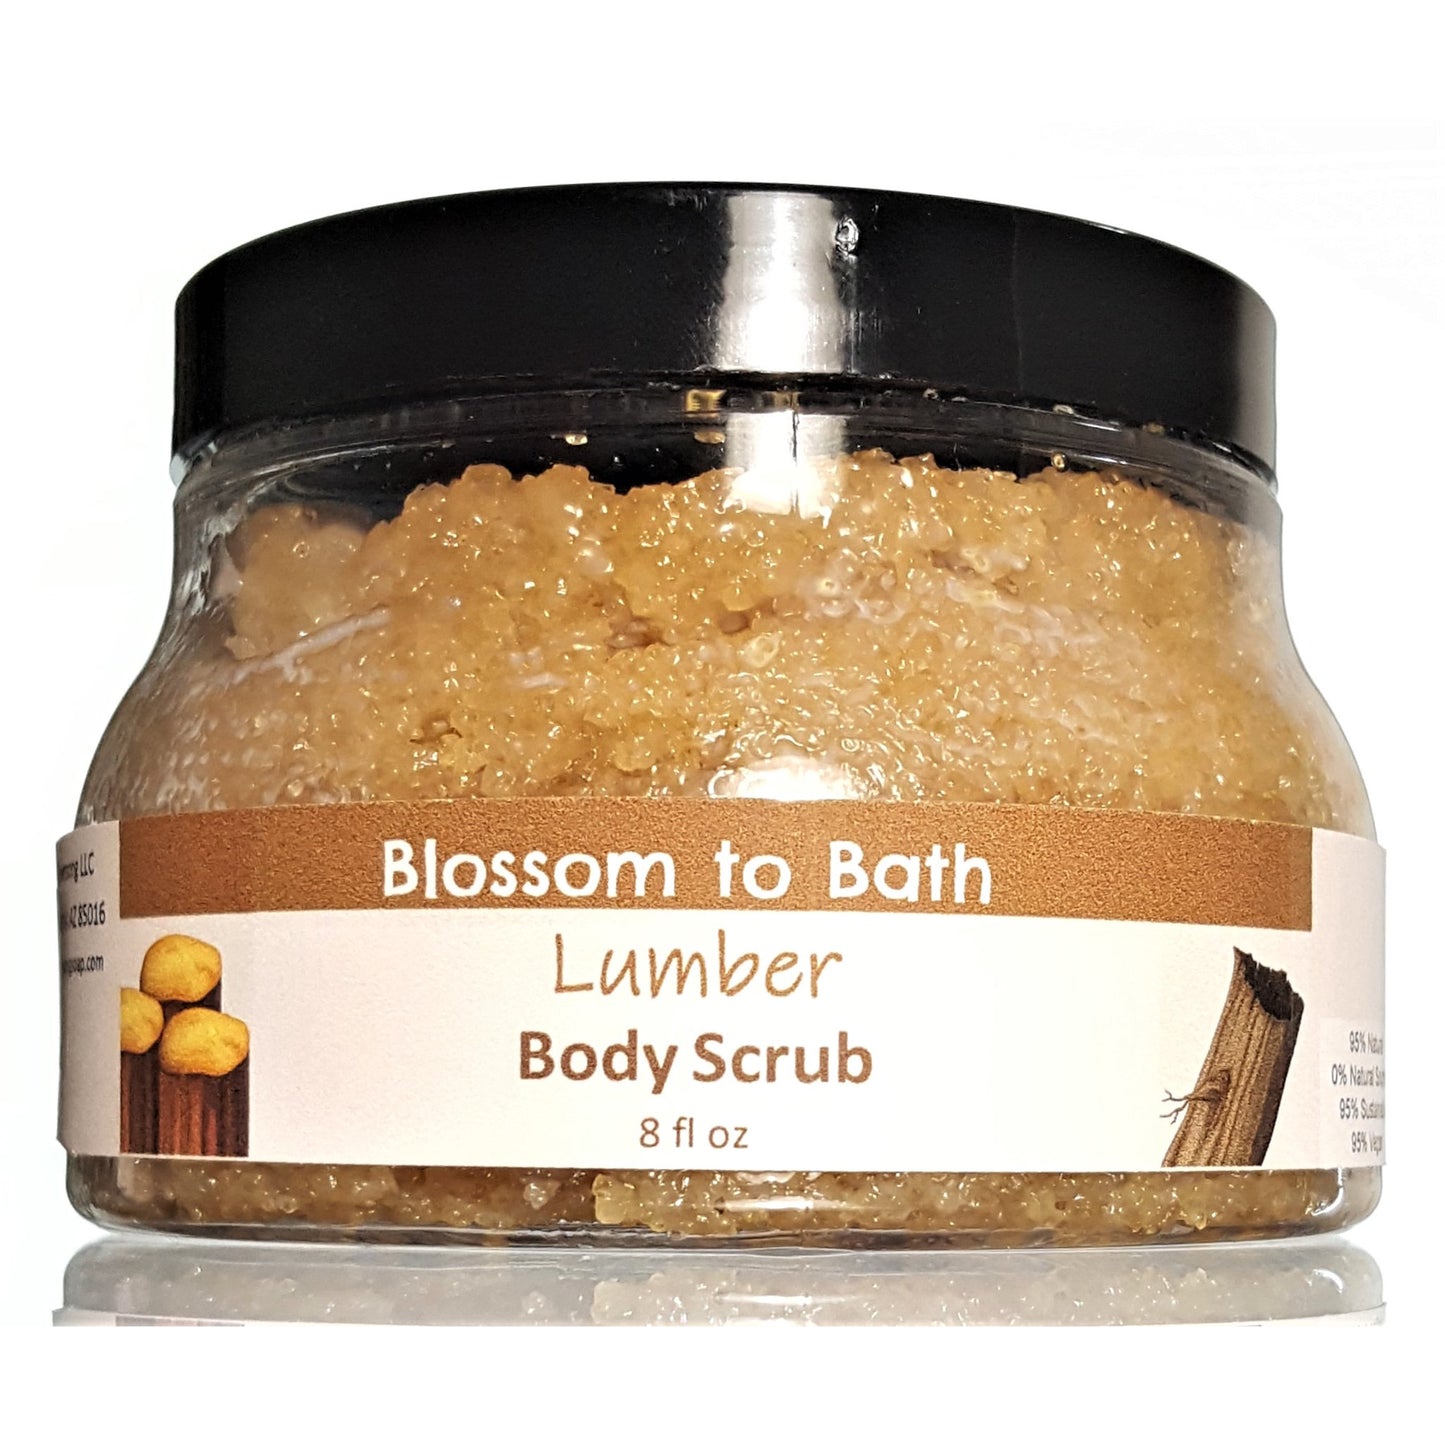 Buy Blossom to Bath Lumber Body Scrub from Flowersong Soap Studio.  Large crystal turbinado sugar plus luxury rich oils conveniently exfoliate and moisturize in one step  A masculine fragrance that echoes fresh cut trees.